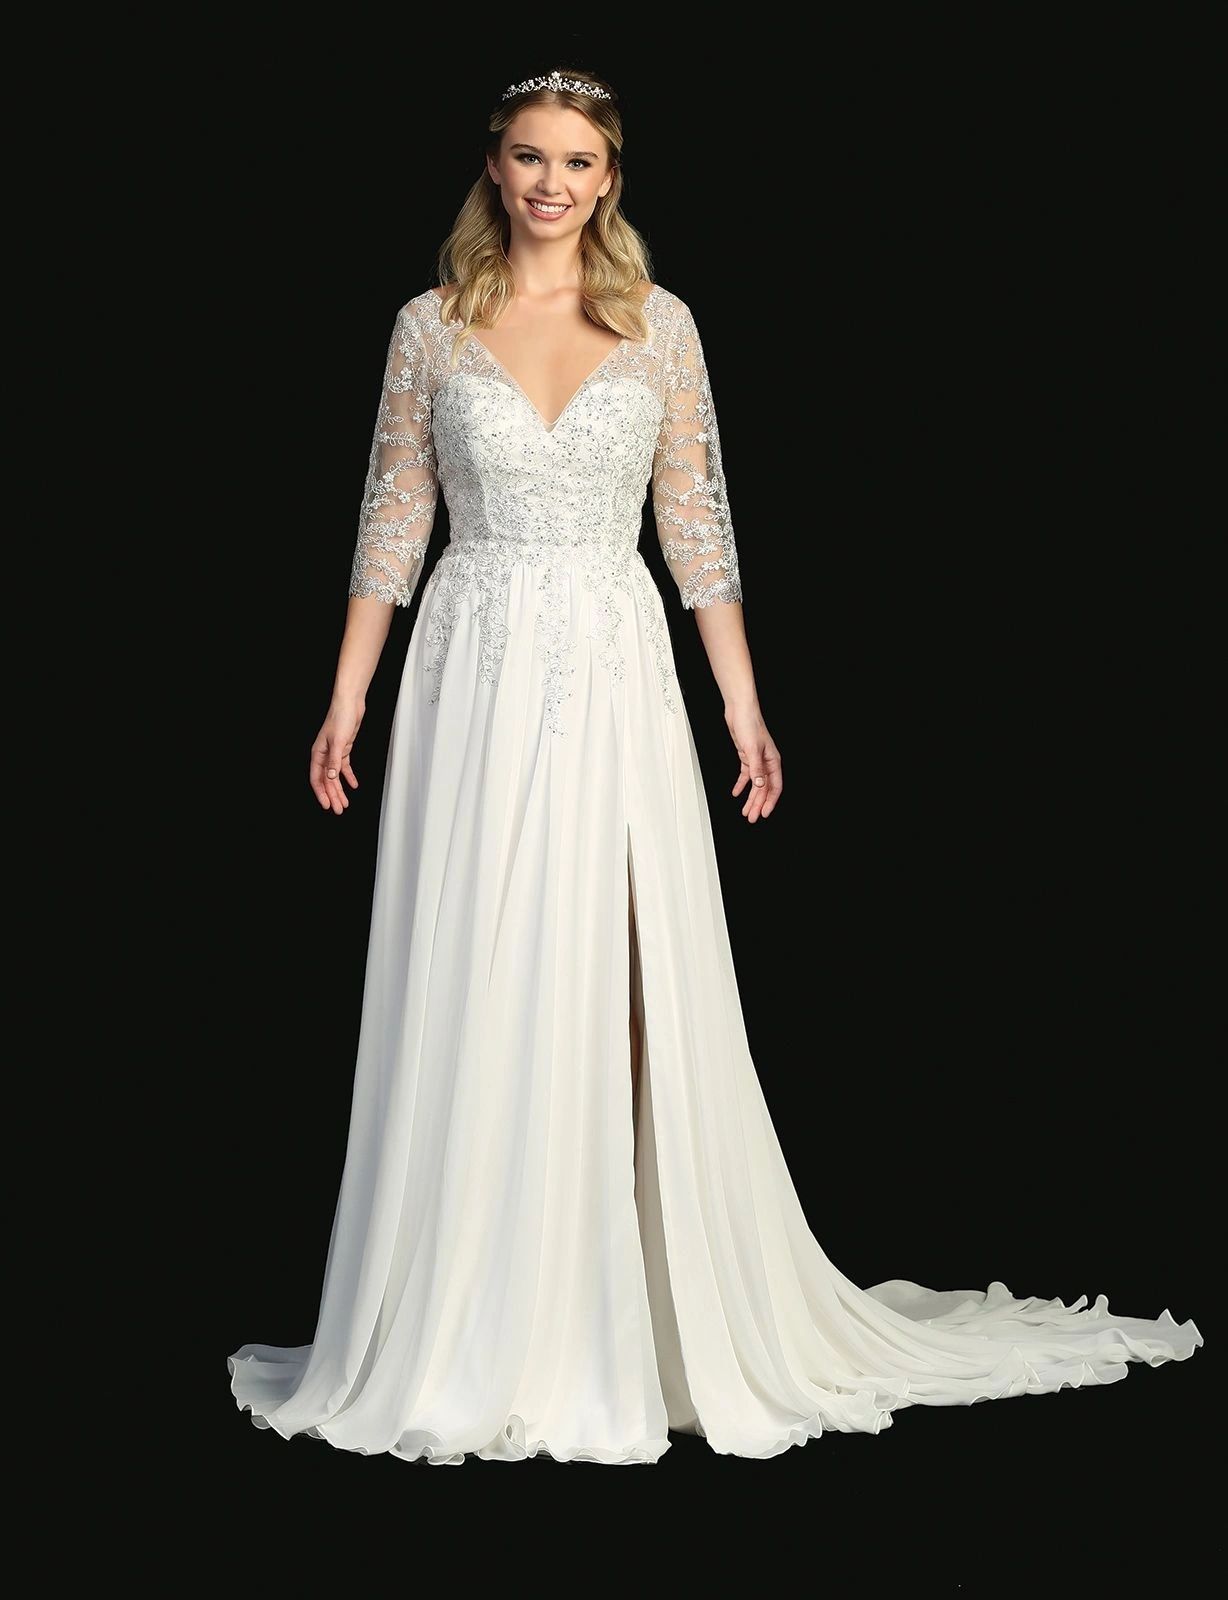 flattering, V-neckline wedding gown with sheer, lace embroidered sleev